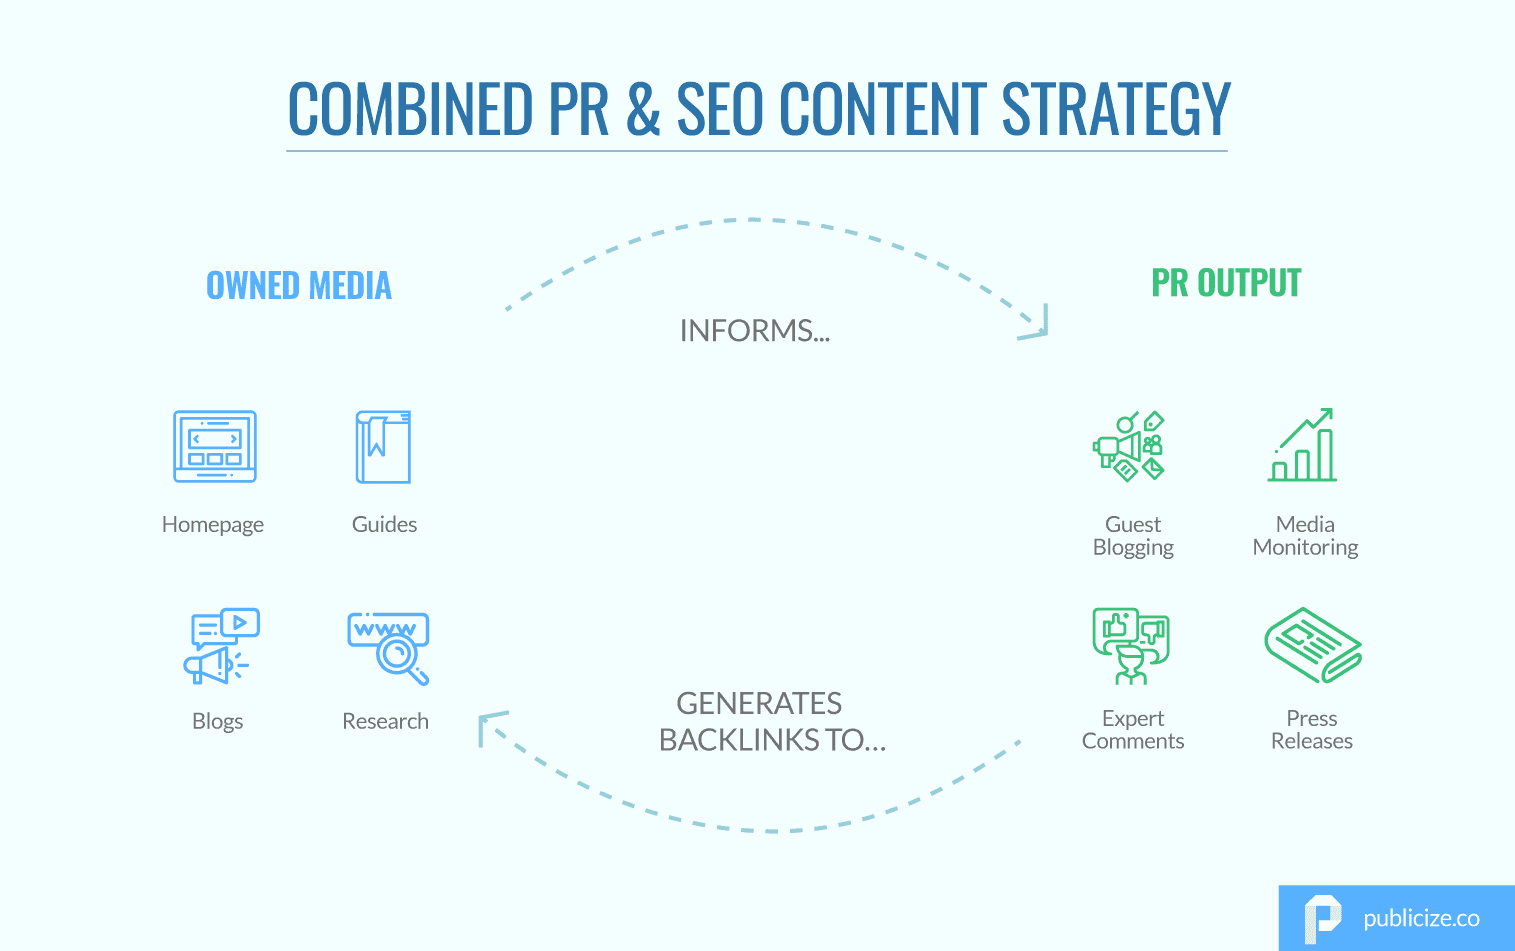 Combining your PR and SEO content strategy infographic